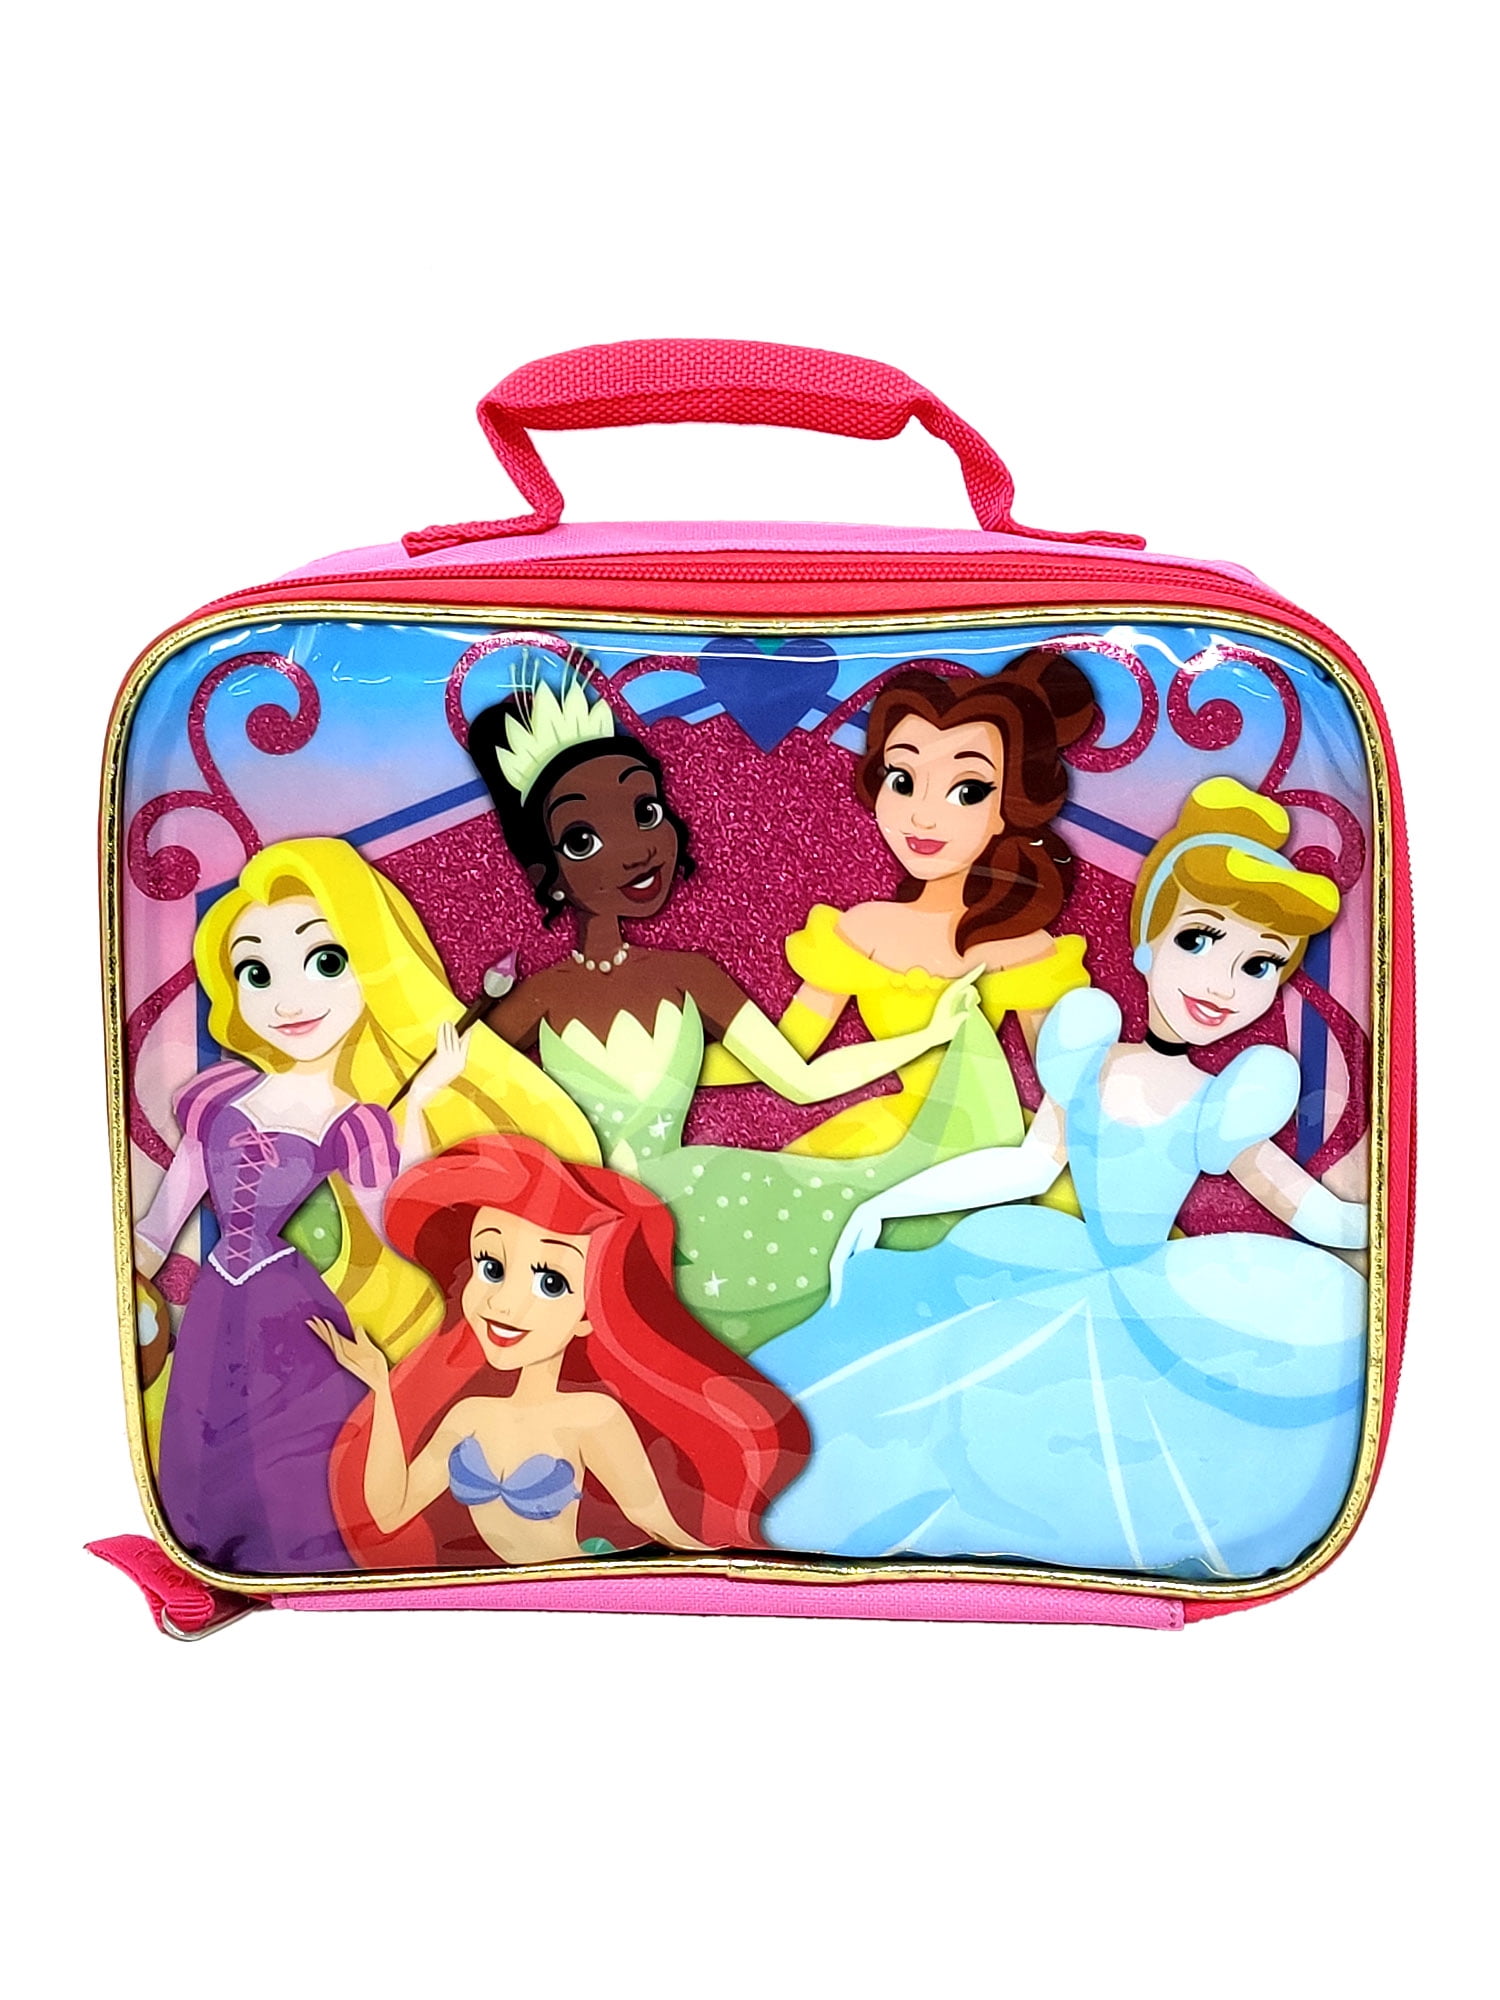 DISNEY ANIMATORS COLLECTION 2019 Princess NWT1 DISNEY Store LUNCH BOX for KIDS 